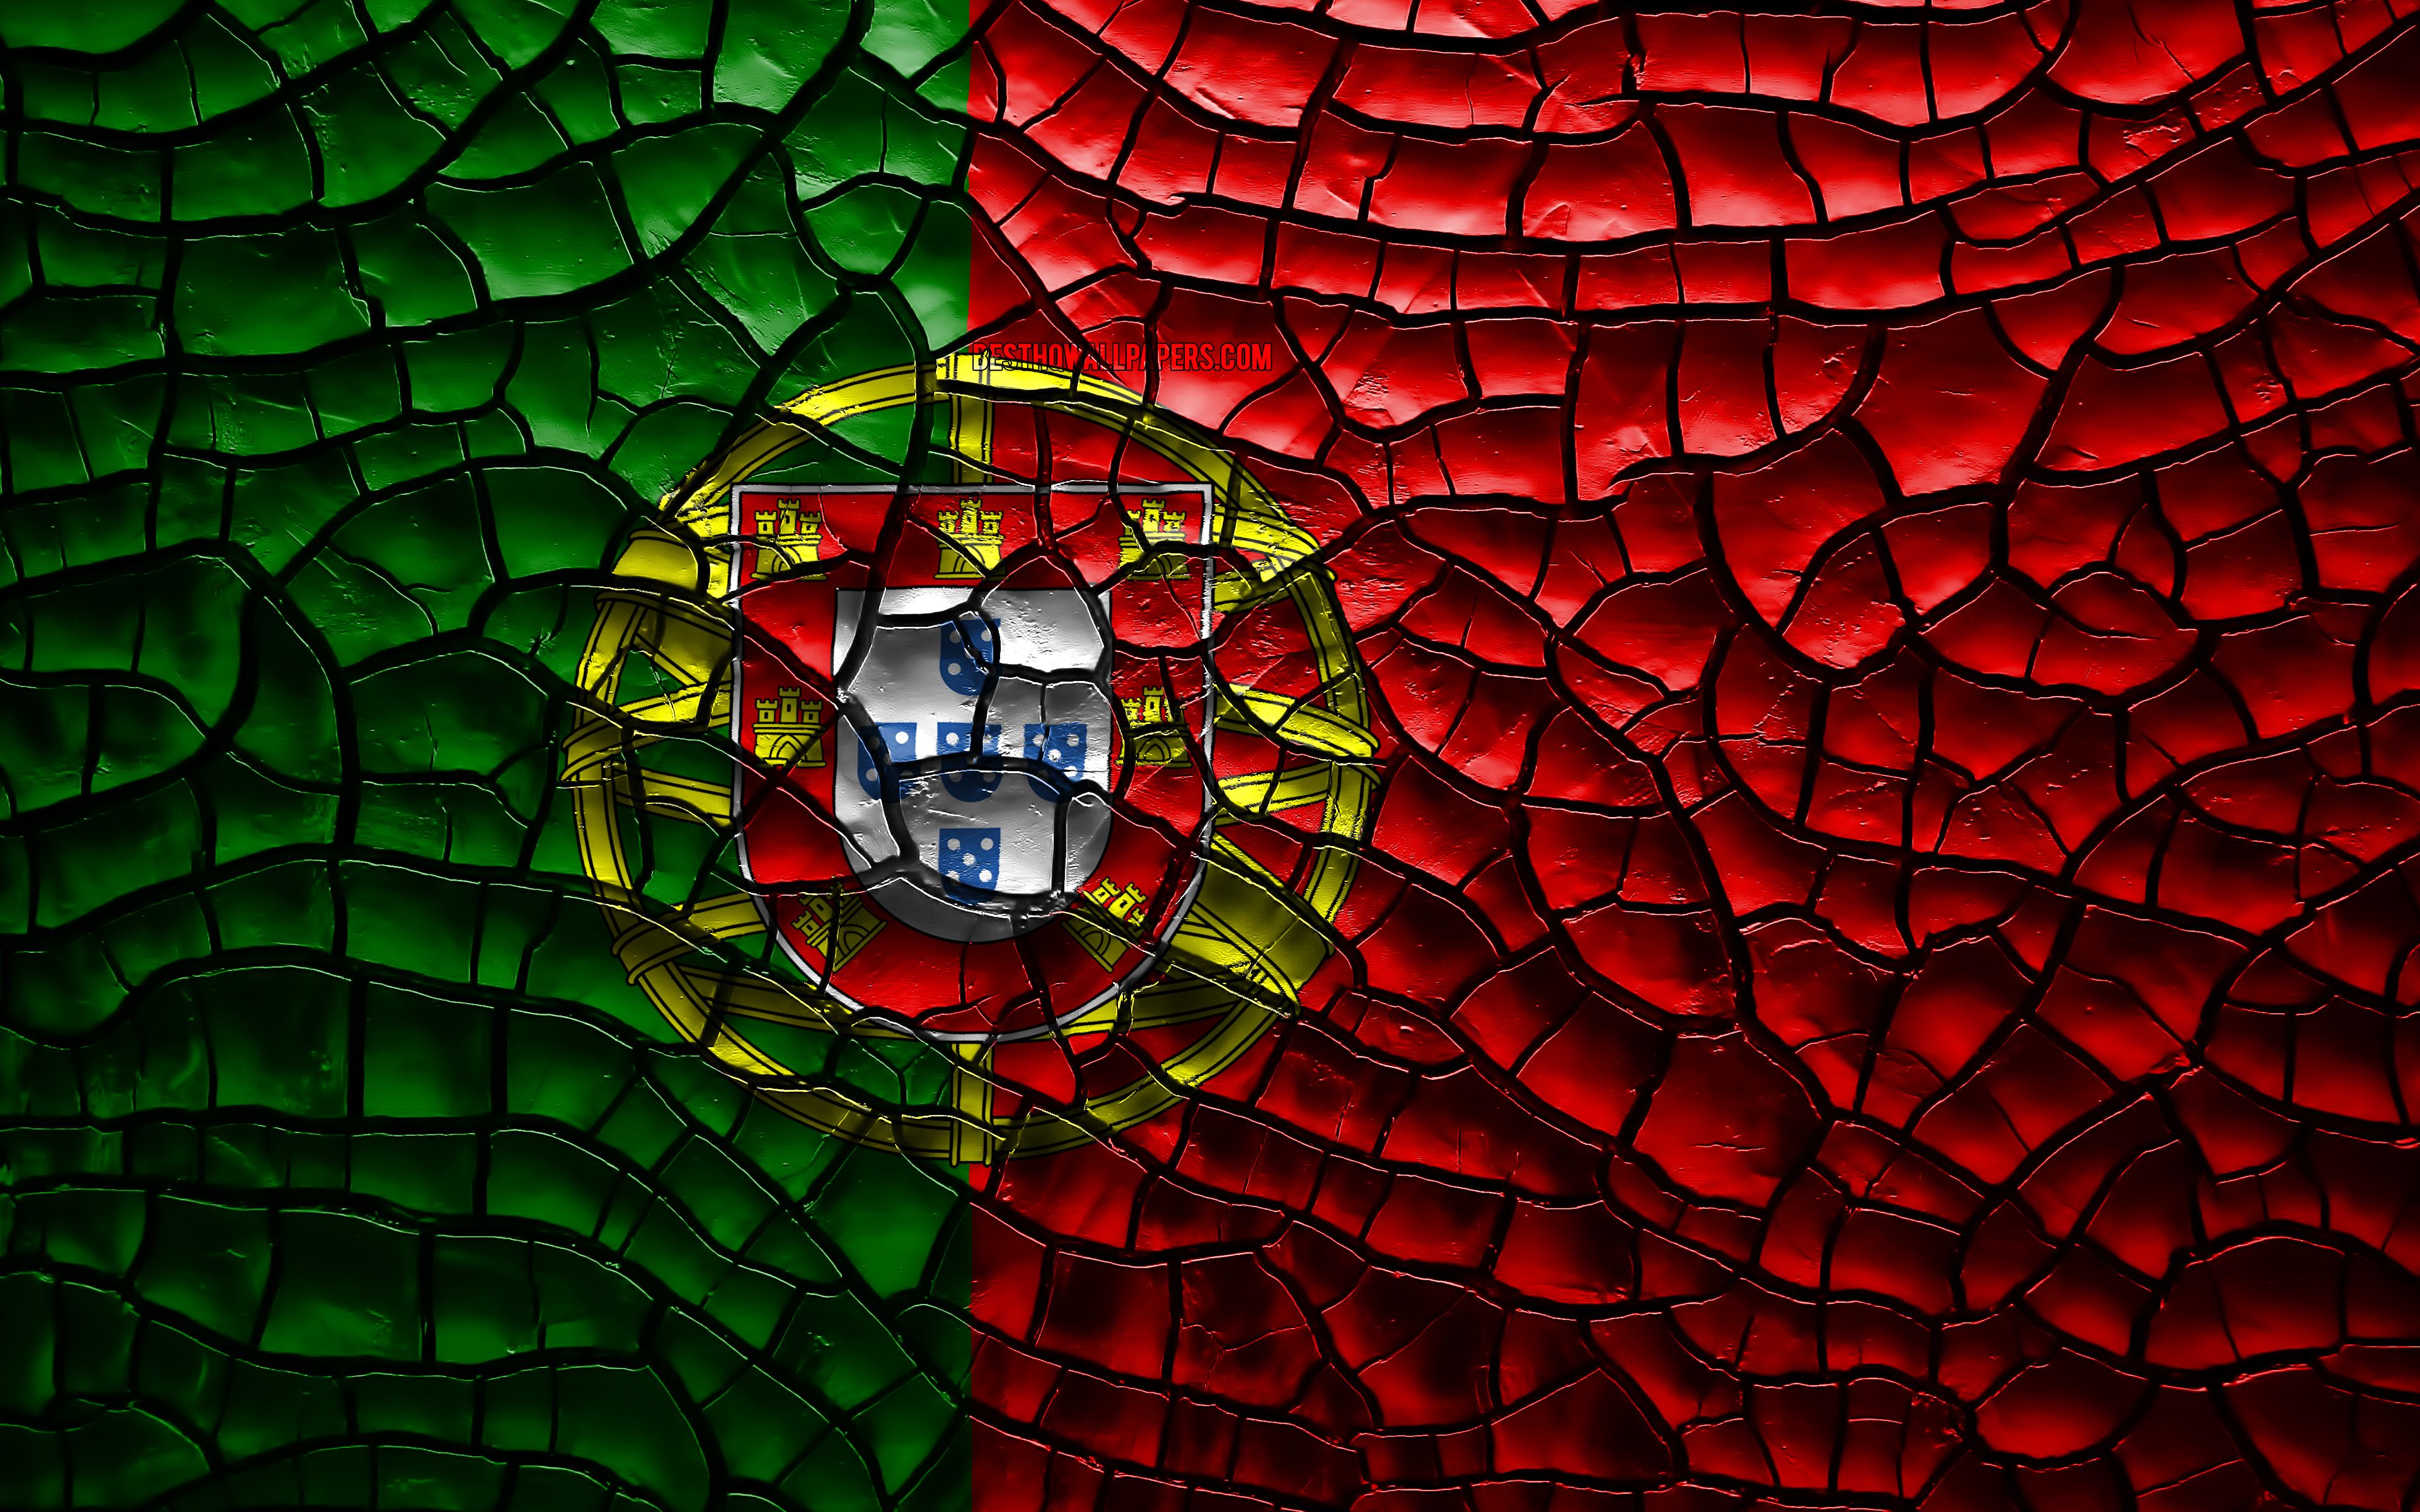 Download wallpaper Flag of Portugal, 4k, cracked soil, Europe, Portuguese flag, 3D art, Portugal, European countries, national symbols, Portugal 3D flag for desktop with resolution 3840x2400. High Quality HD picture wallpaper